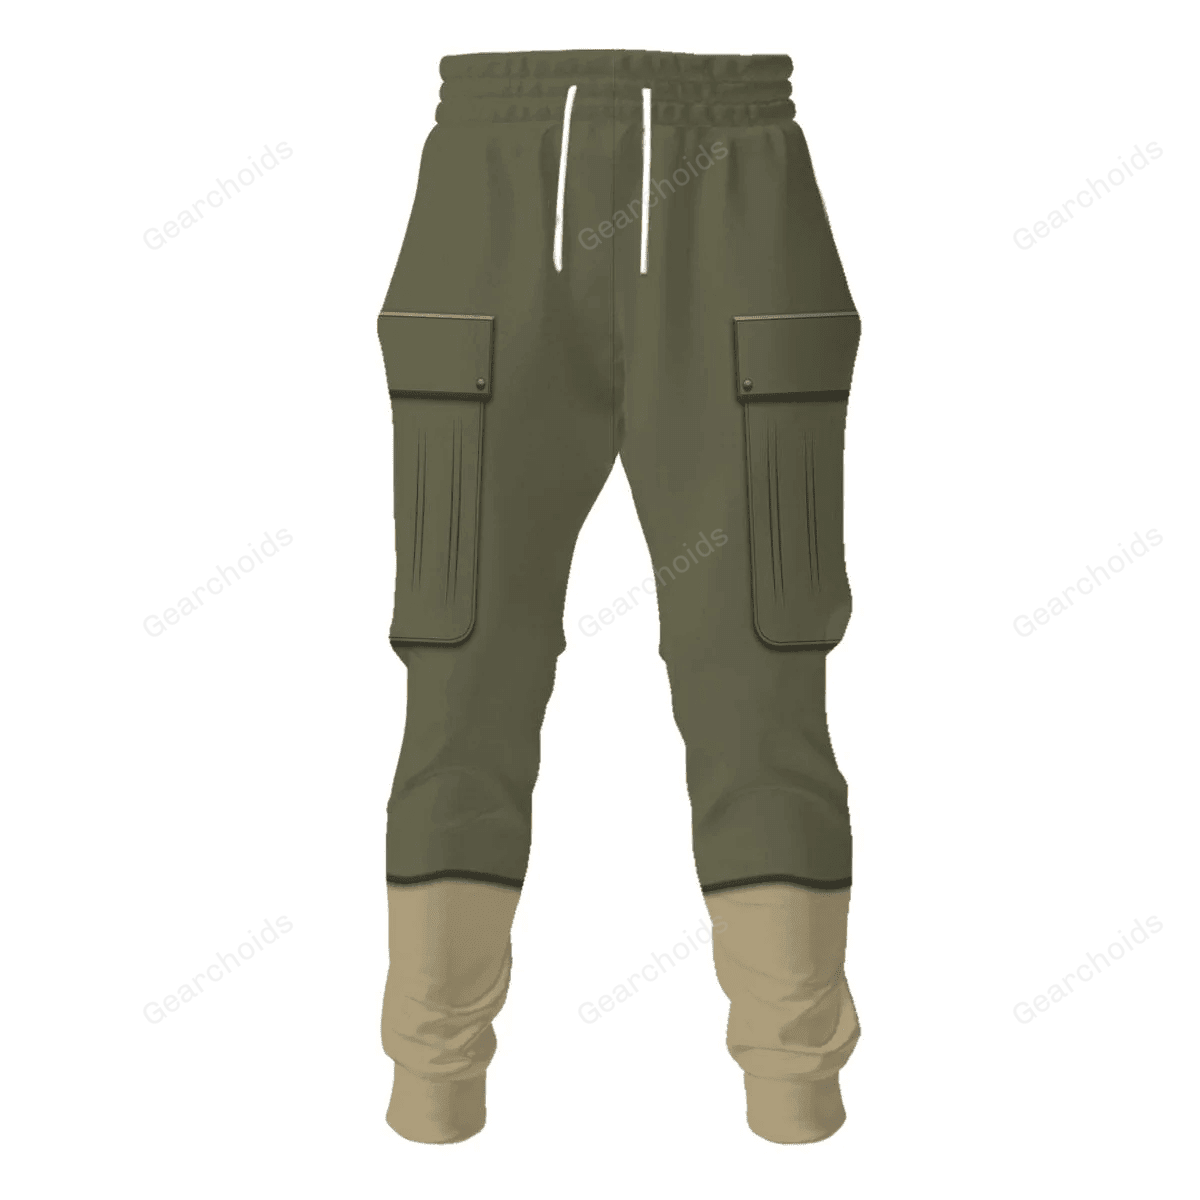 442nd Infantry Regiment Private Costume Sweatpants